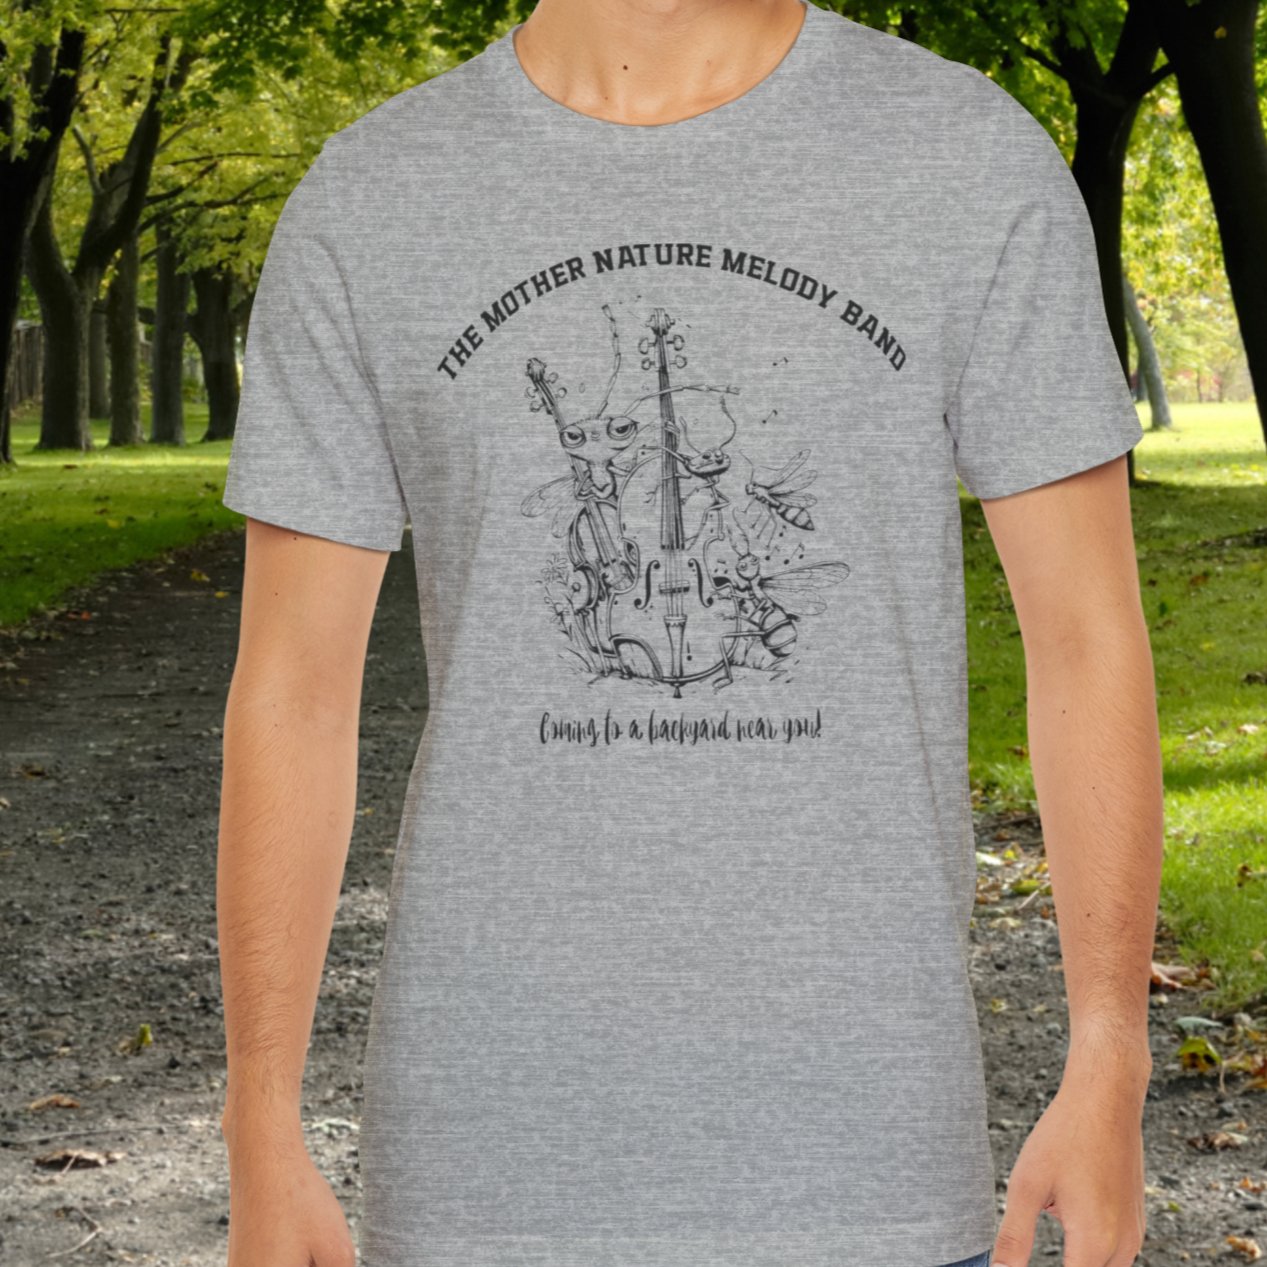 Cute Whimsical Meadow Insect Band T-shirt! "The Mother Nature Melody Band", Cartoon - FlooredByArt